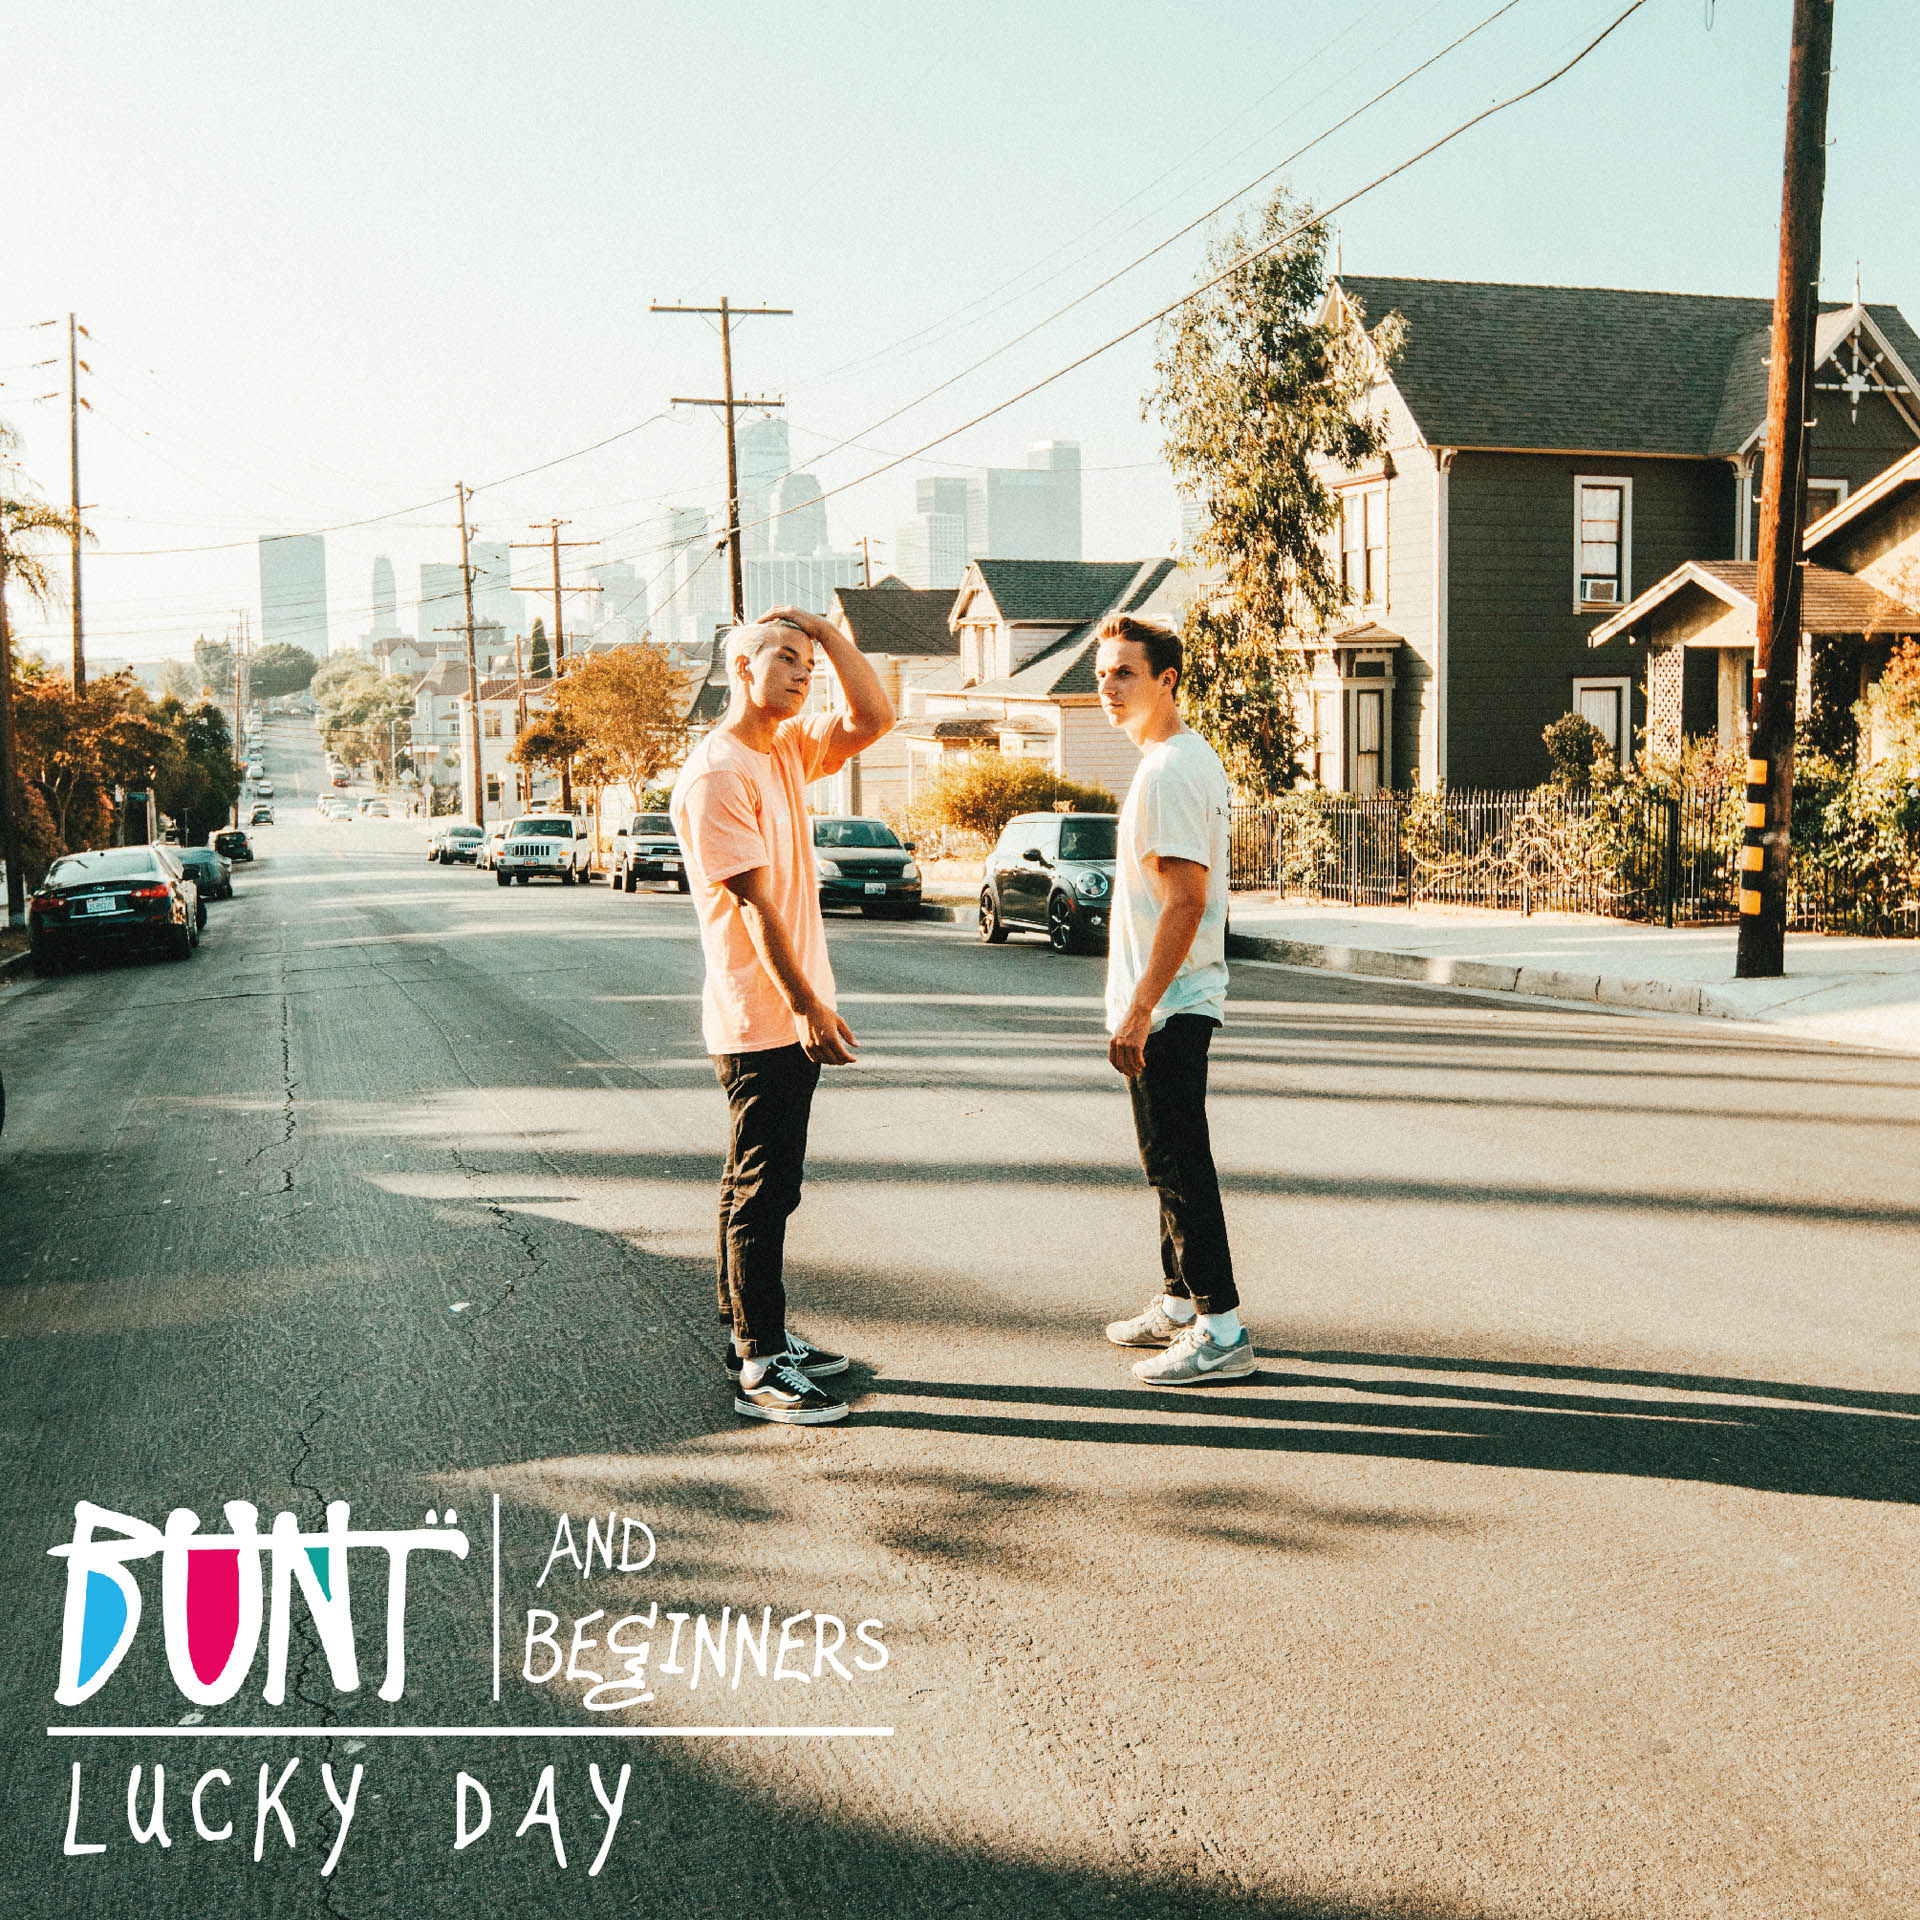 Bunt - Lucky Day